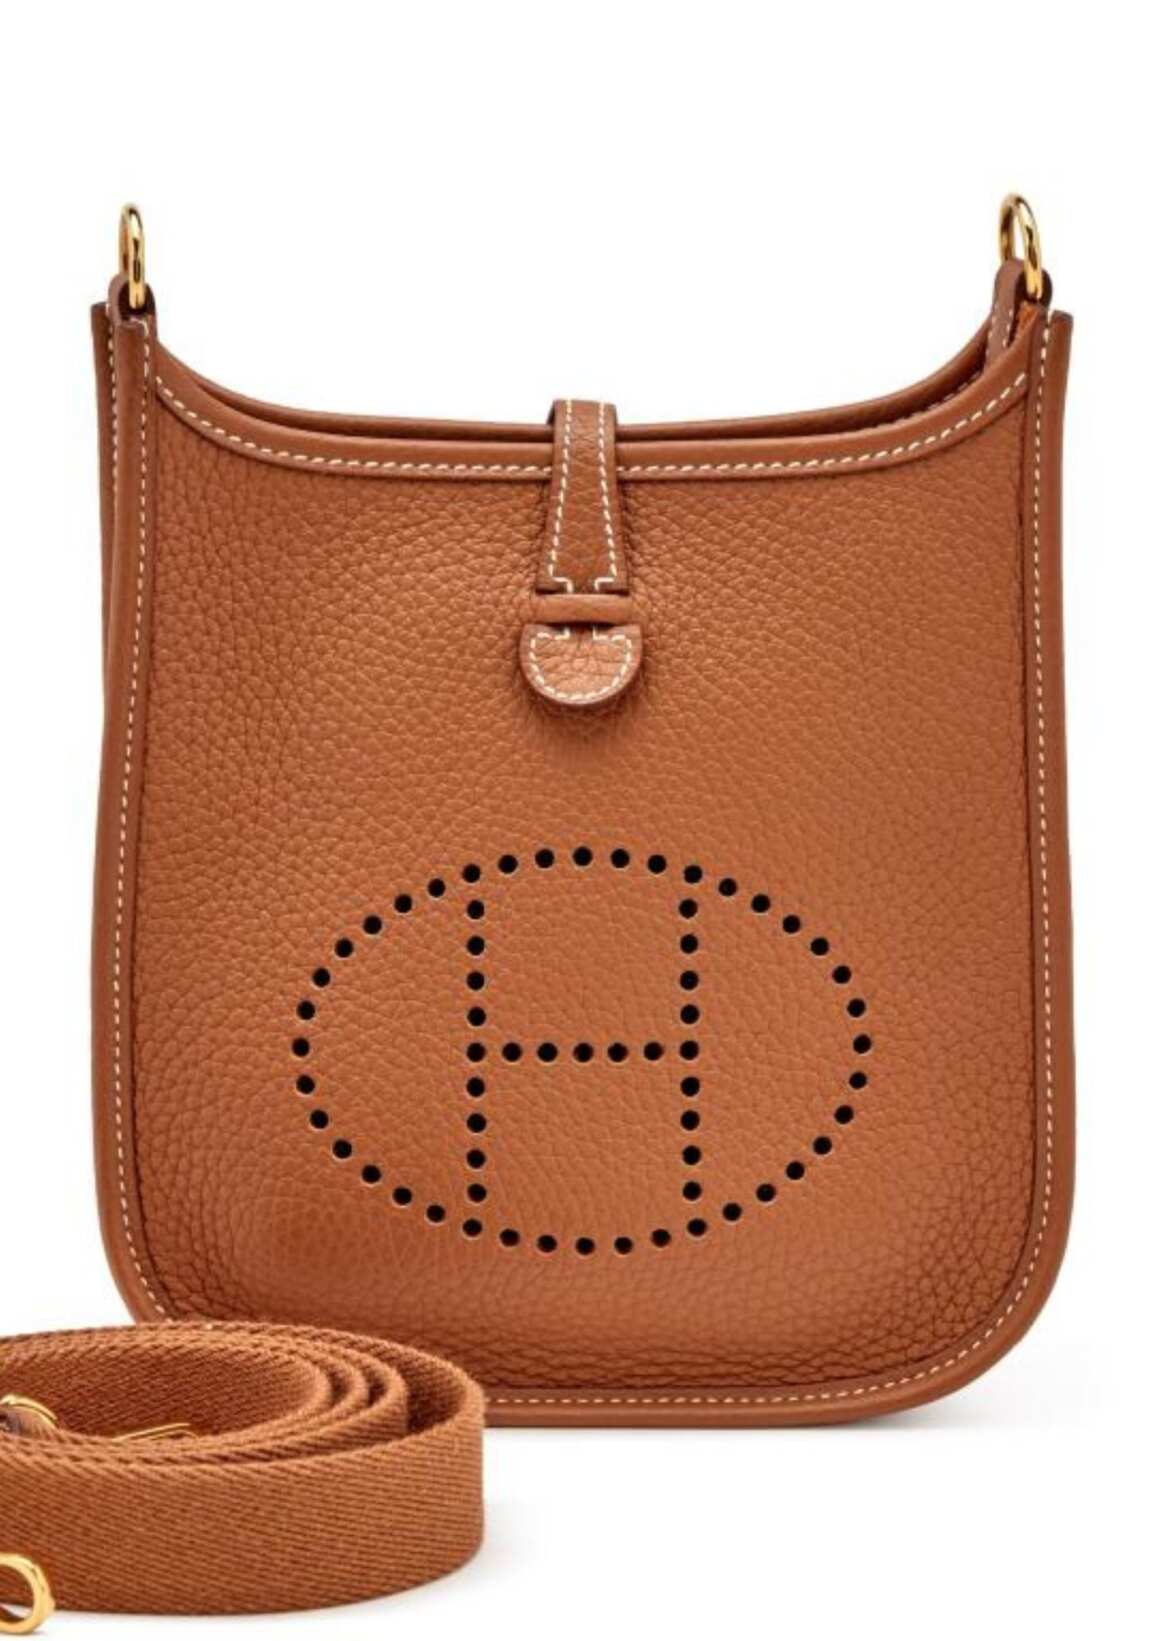 How to Buy Your First-Ever Hermès Kelly Bag